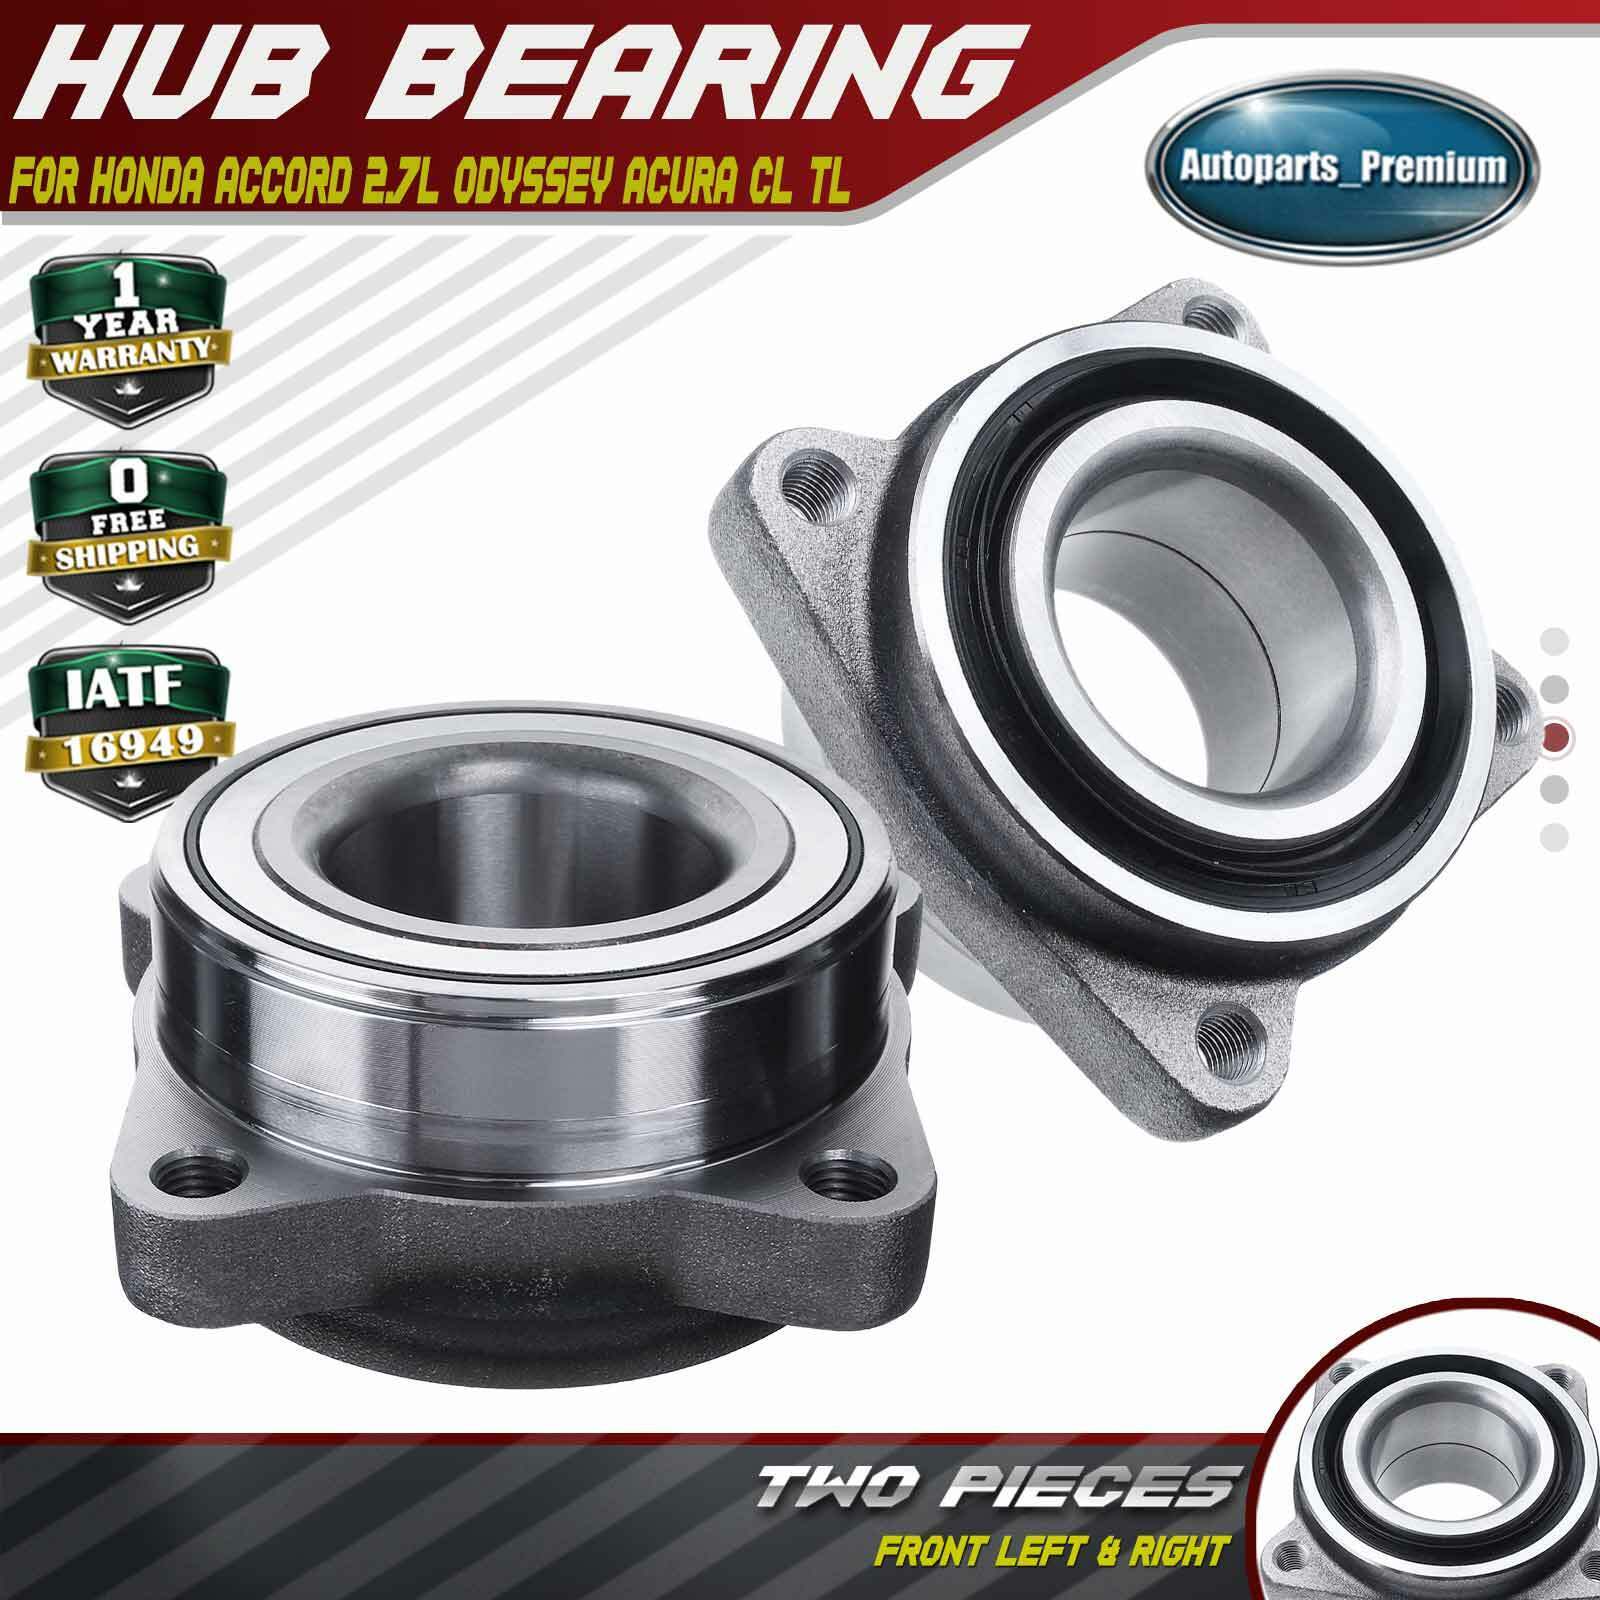 Front L & R Wheel Bearing Hub Assembly for Honda Accord 2.7L Odyssey Acura CL TL